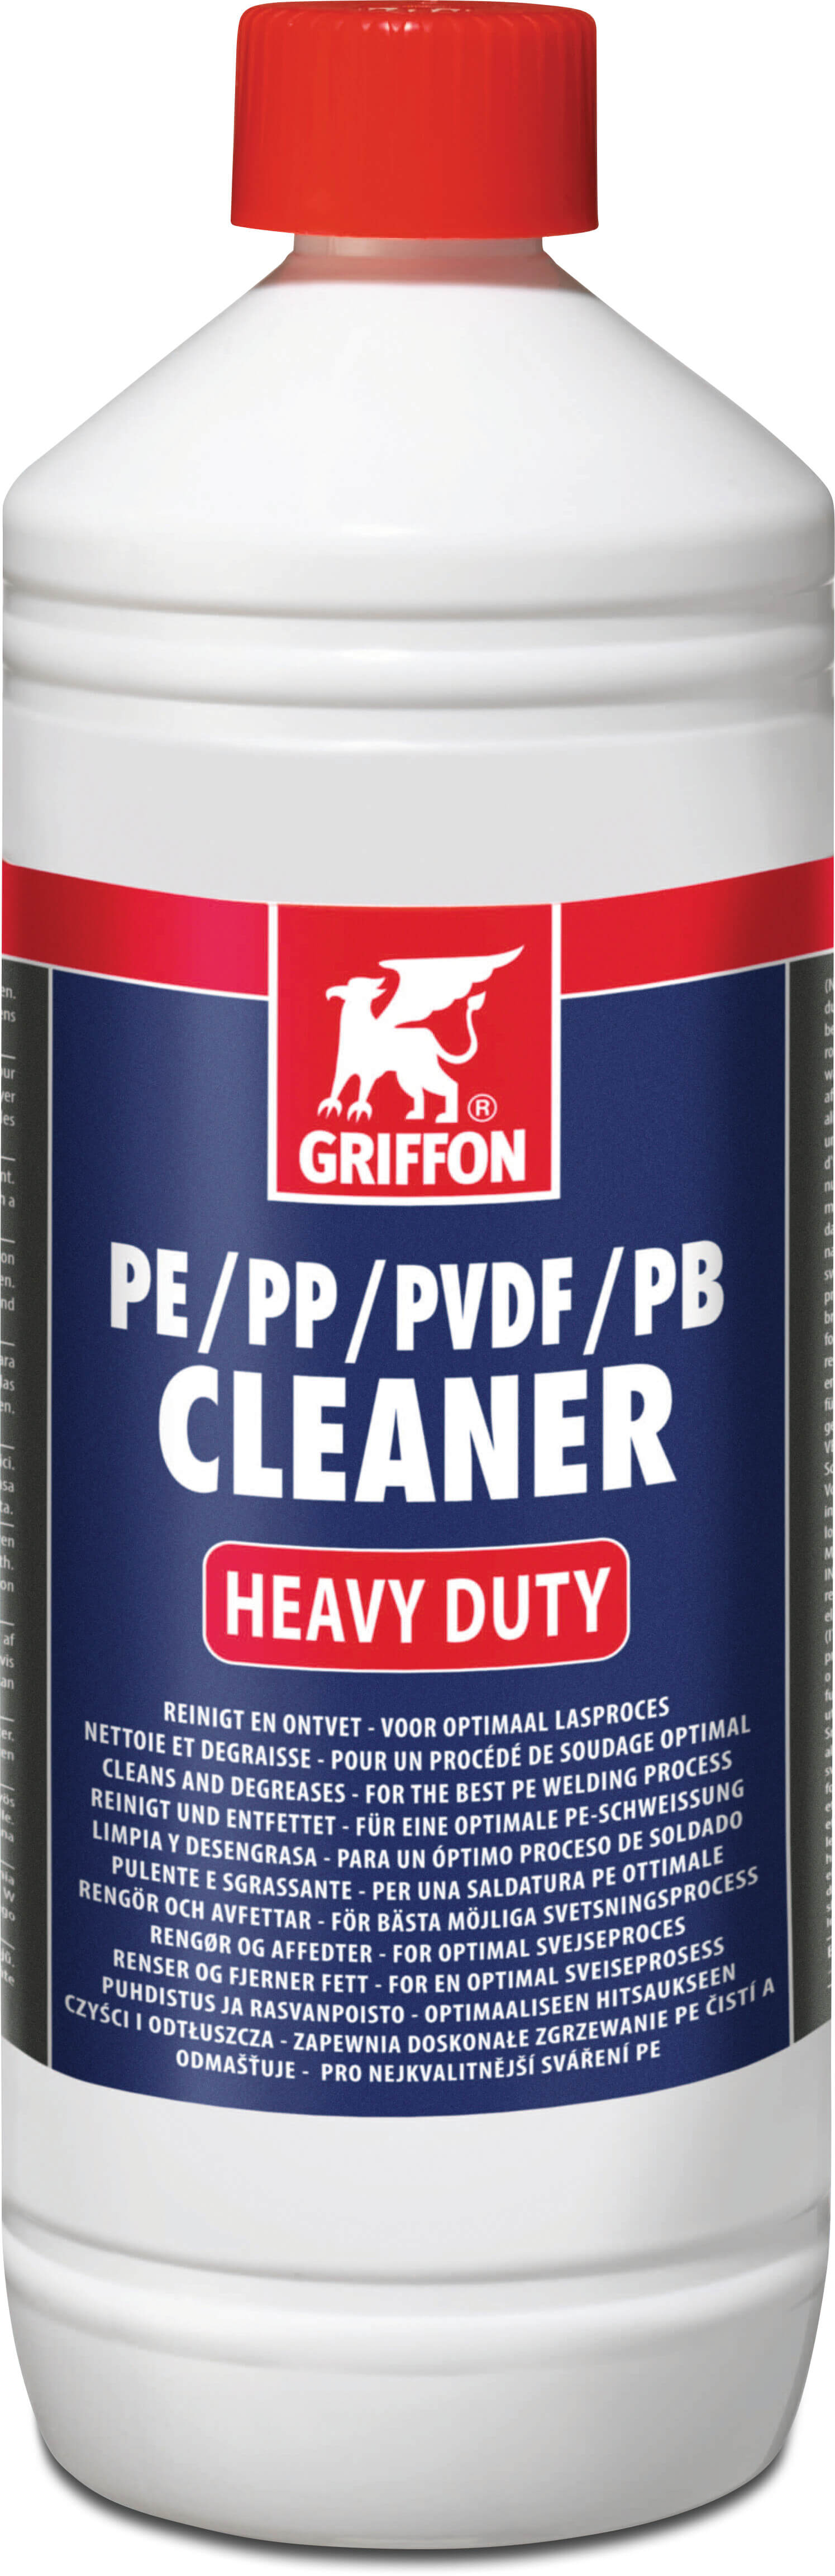 Griffon Solvent cleaner for PE/PP/PB/PVDF 1ltr